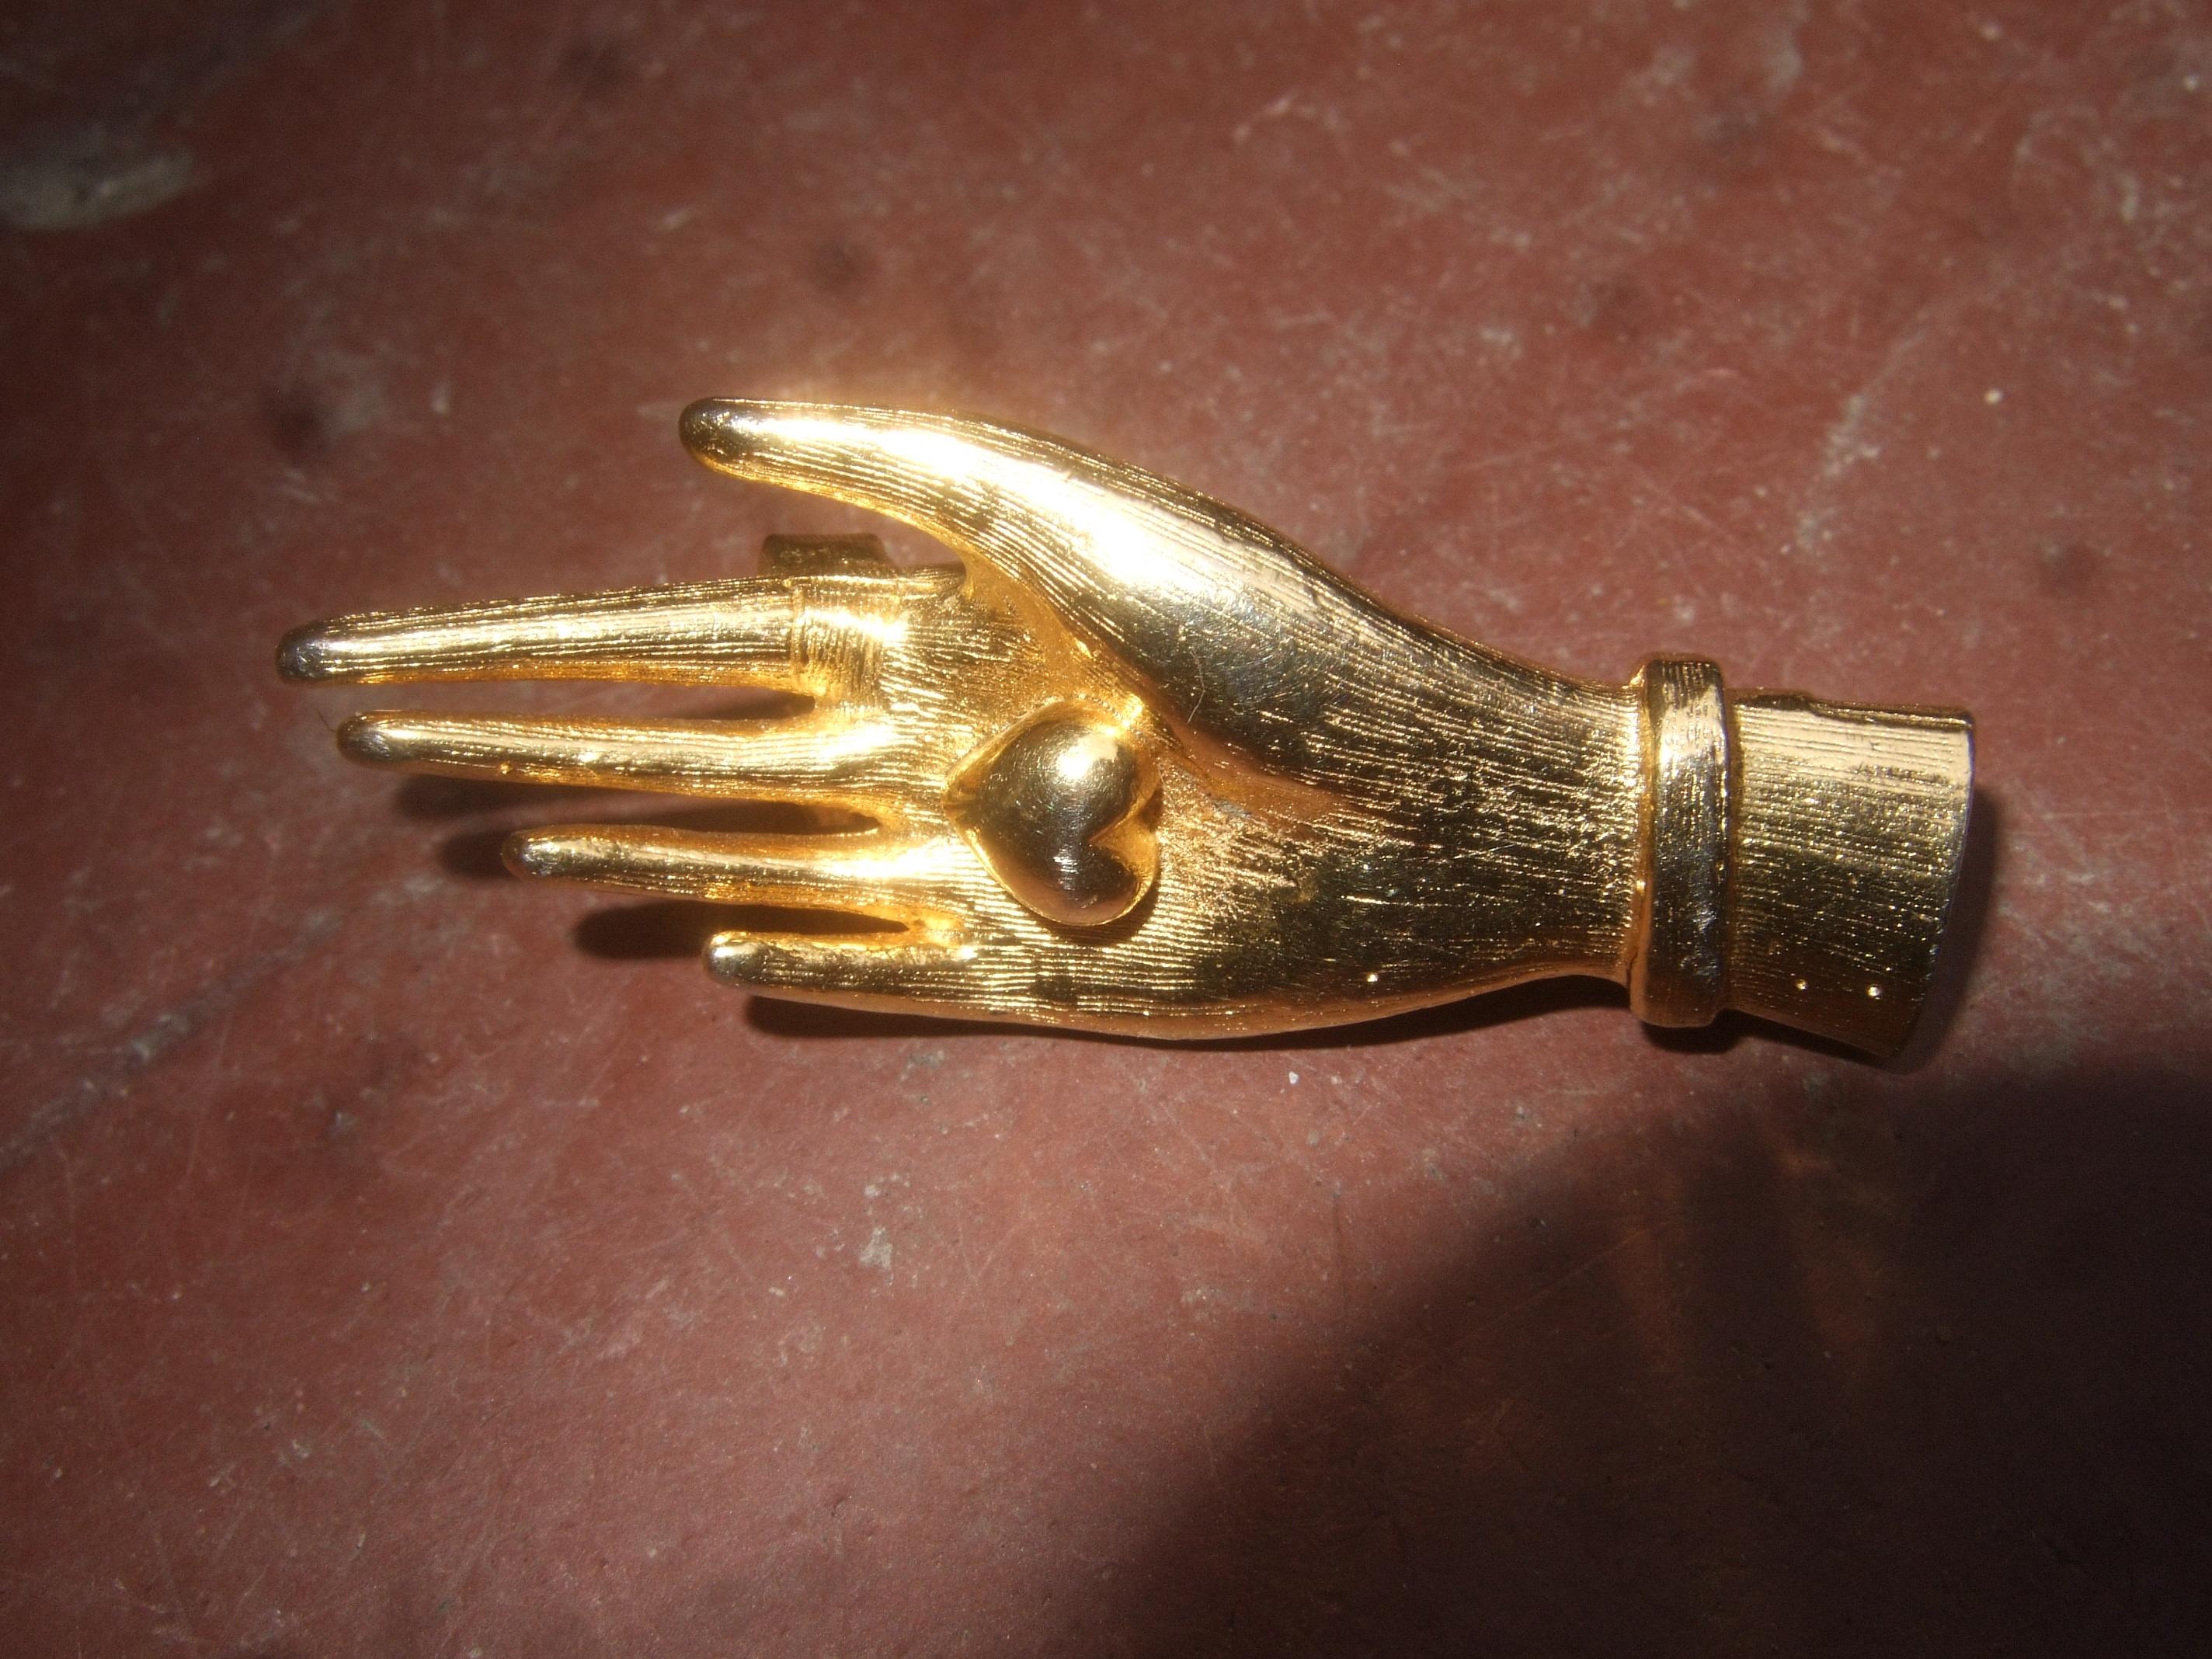 Judith Leiber Gilt metal diminutive size figural hand brooch c 1980s
The unique stylized hand brooch is sheathed with luminous gilt metal
The palm of the hand is holding a small size heart 

Makes a charming compact size accessory pinned on a lapel,